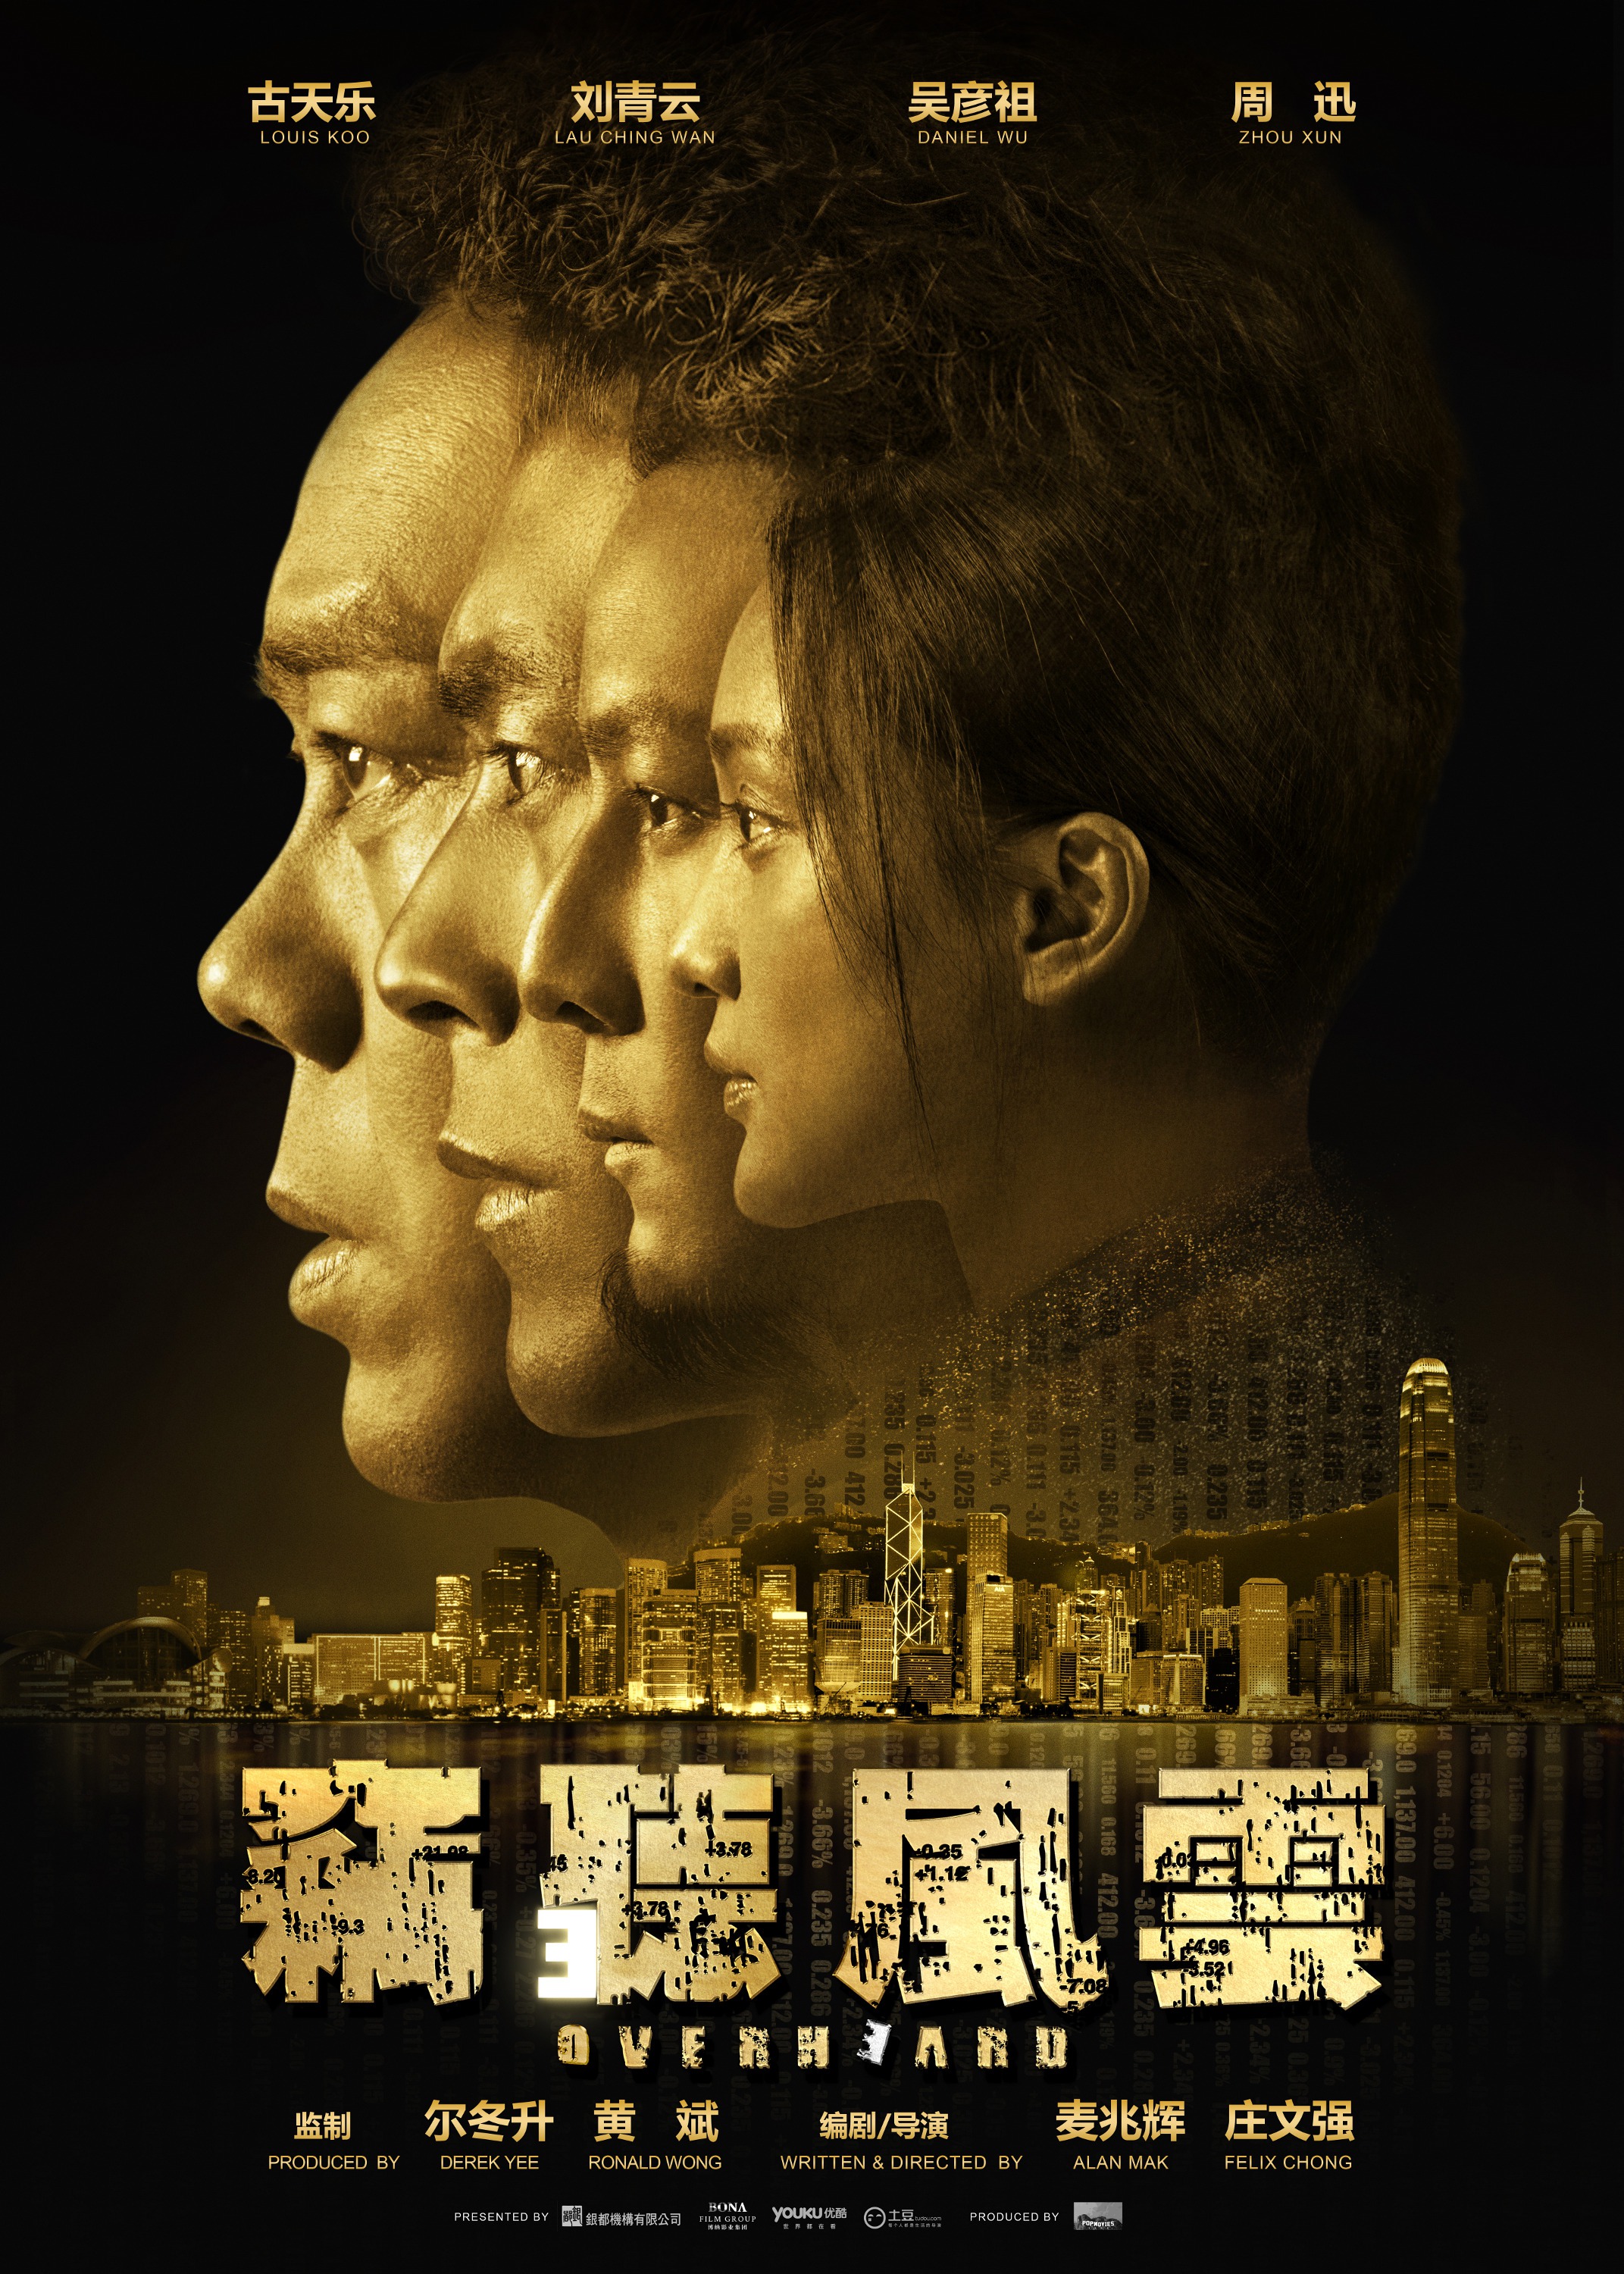 Mega Sized Movie Poster Image for Sit ting fung wan 3 (#7 of 7)